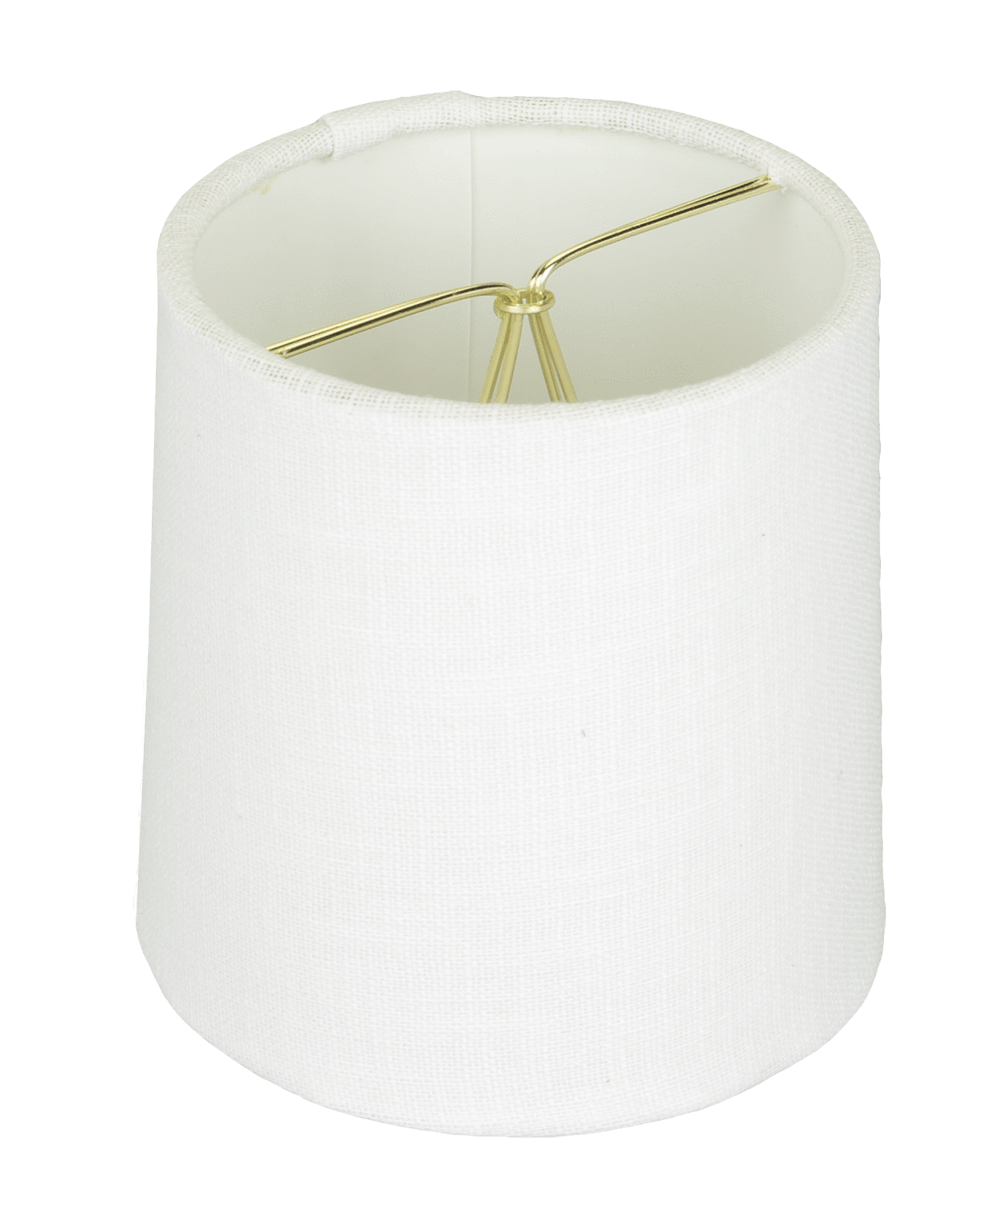  lamp shade 4 x 4.5 x 4.5"   (Candle Clip) / Linen / White Drum Chandelier Hardback Linen with Chrome Clip-on Lamp Shade - 4 x 4.5 x 4.5"